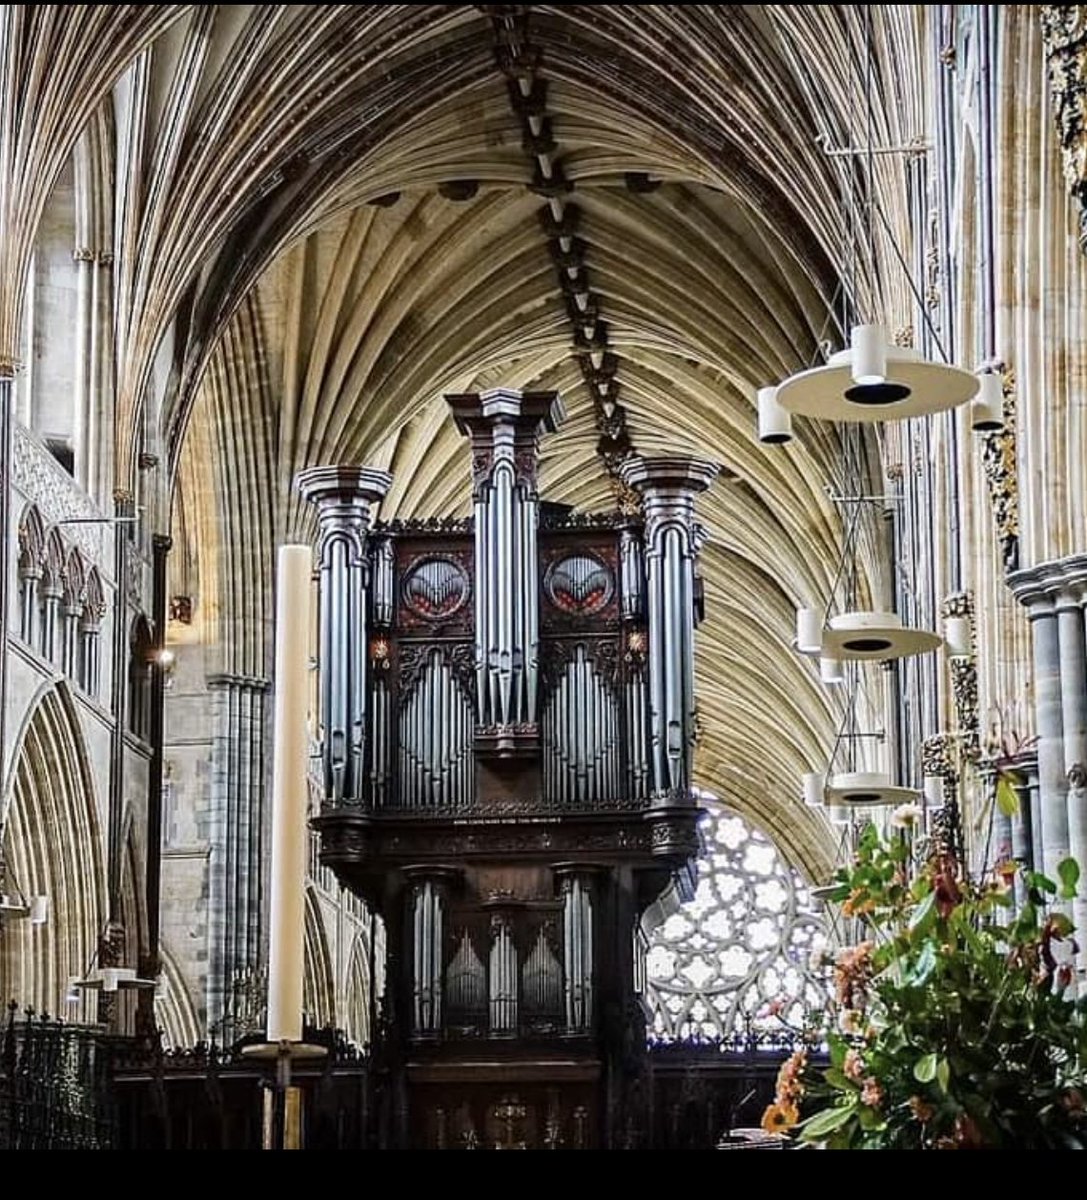 bells I talked about earlier have been destroyed and are disappearing. So again are you seeing the big picture??The old organs are incredible. I believe they were created for Cathedral they went in , like creating a real physical